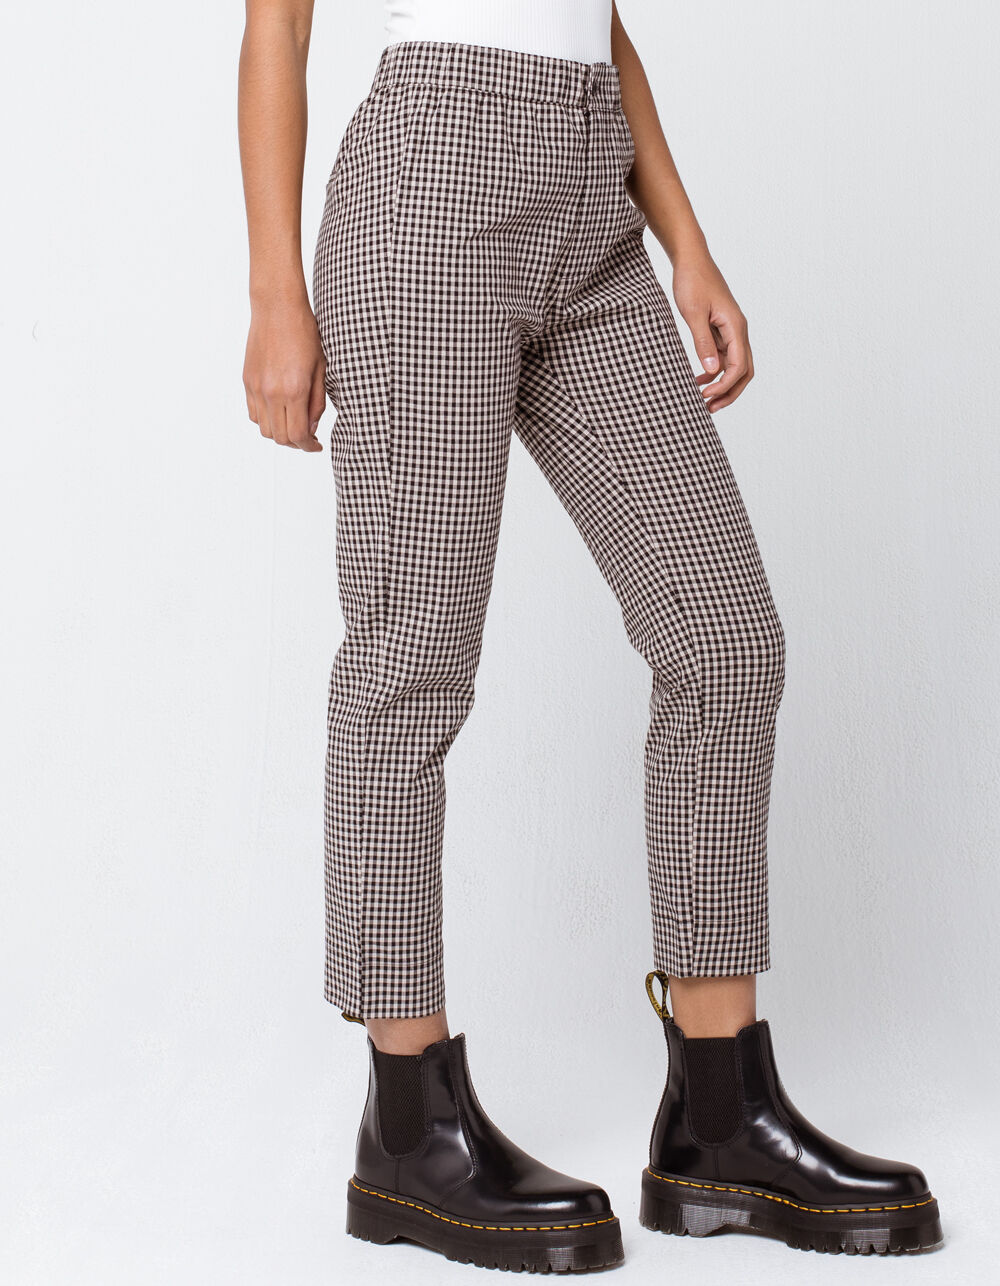 IVY & MAIN Gingham Womens Pants image number 3